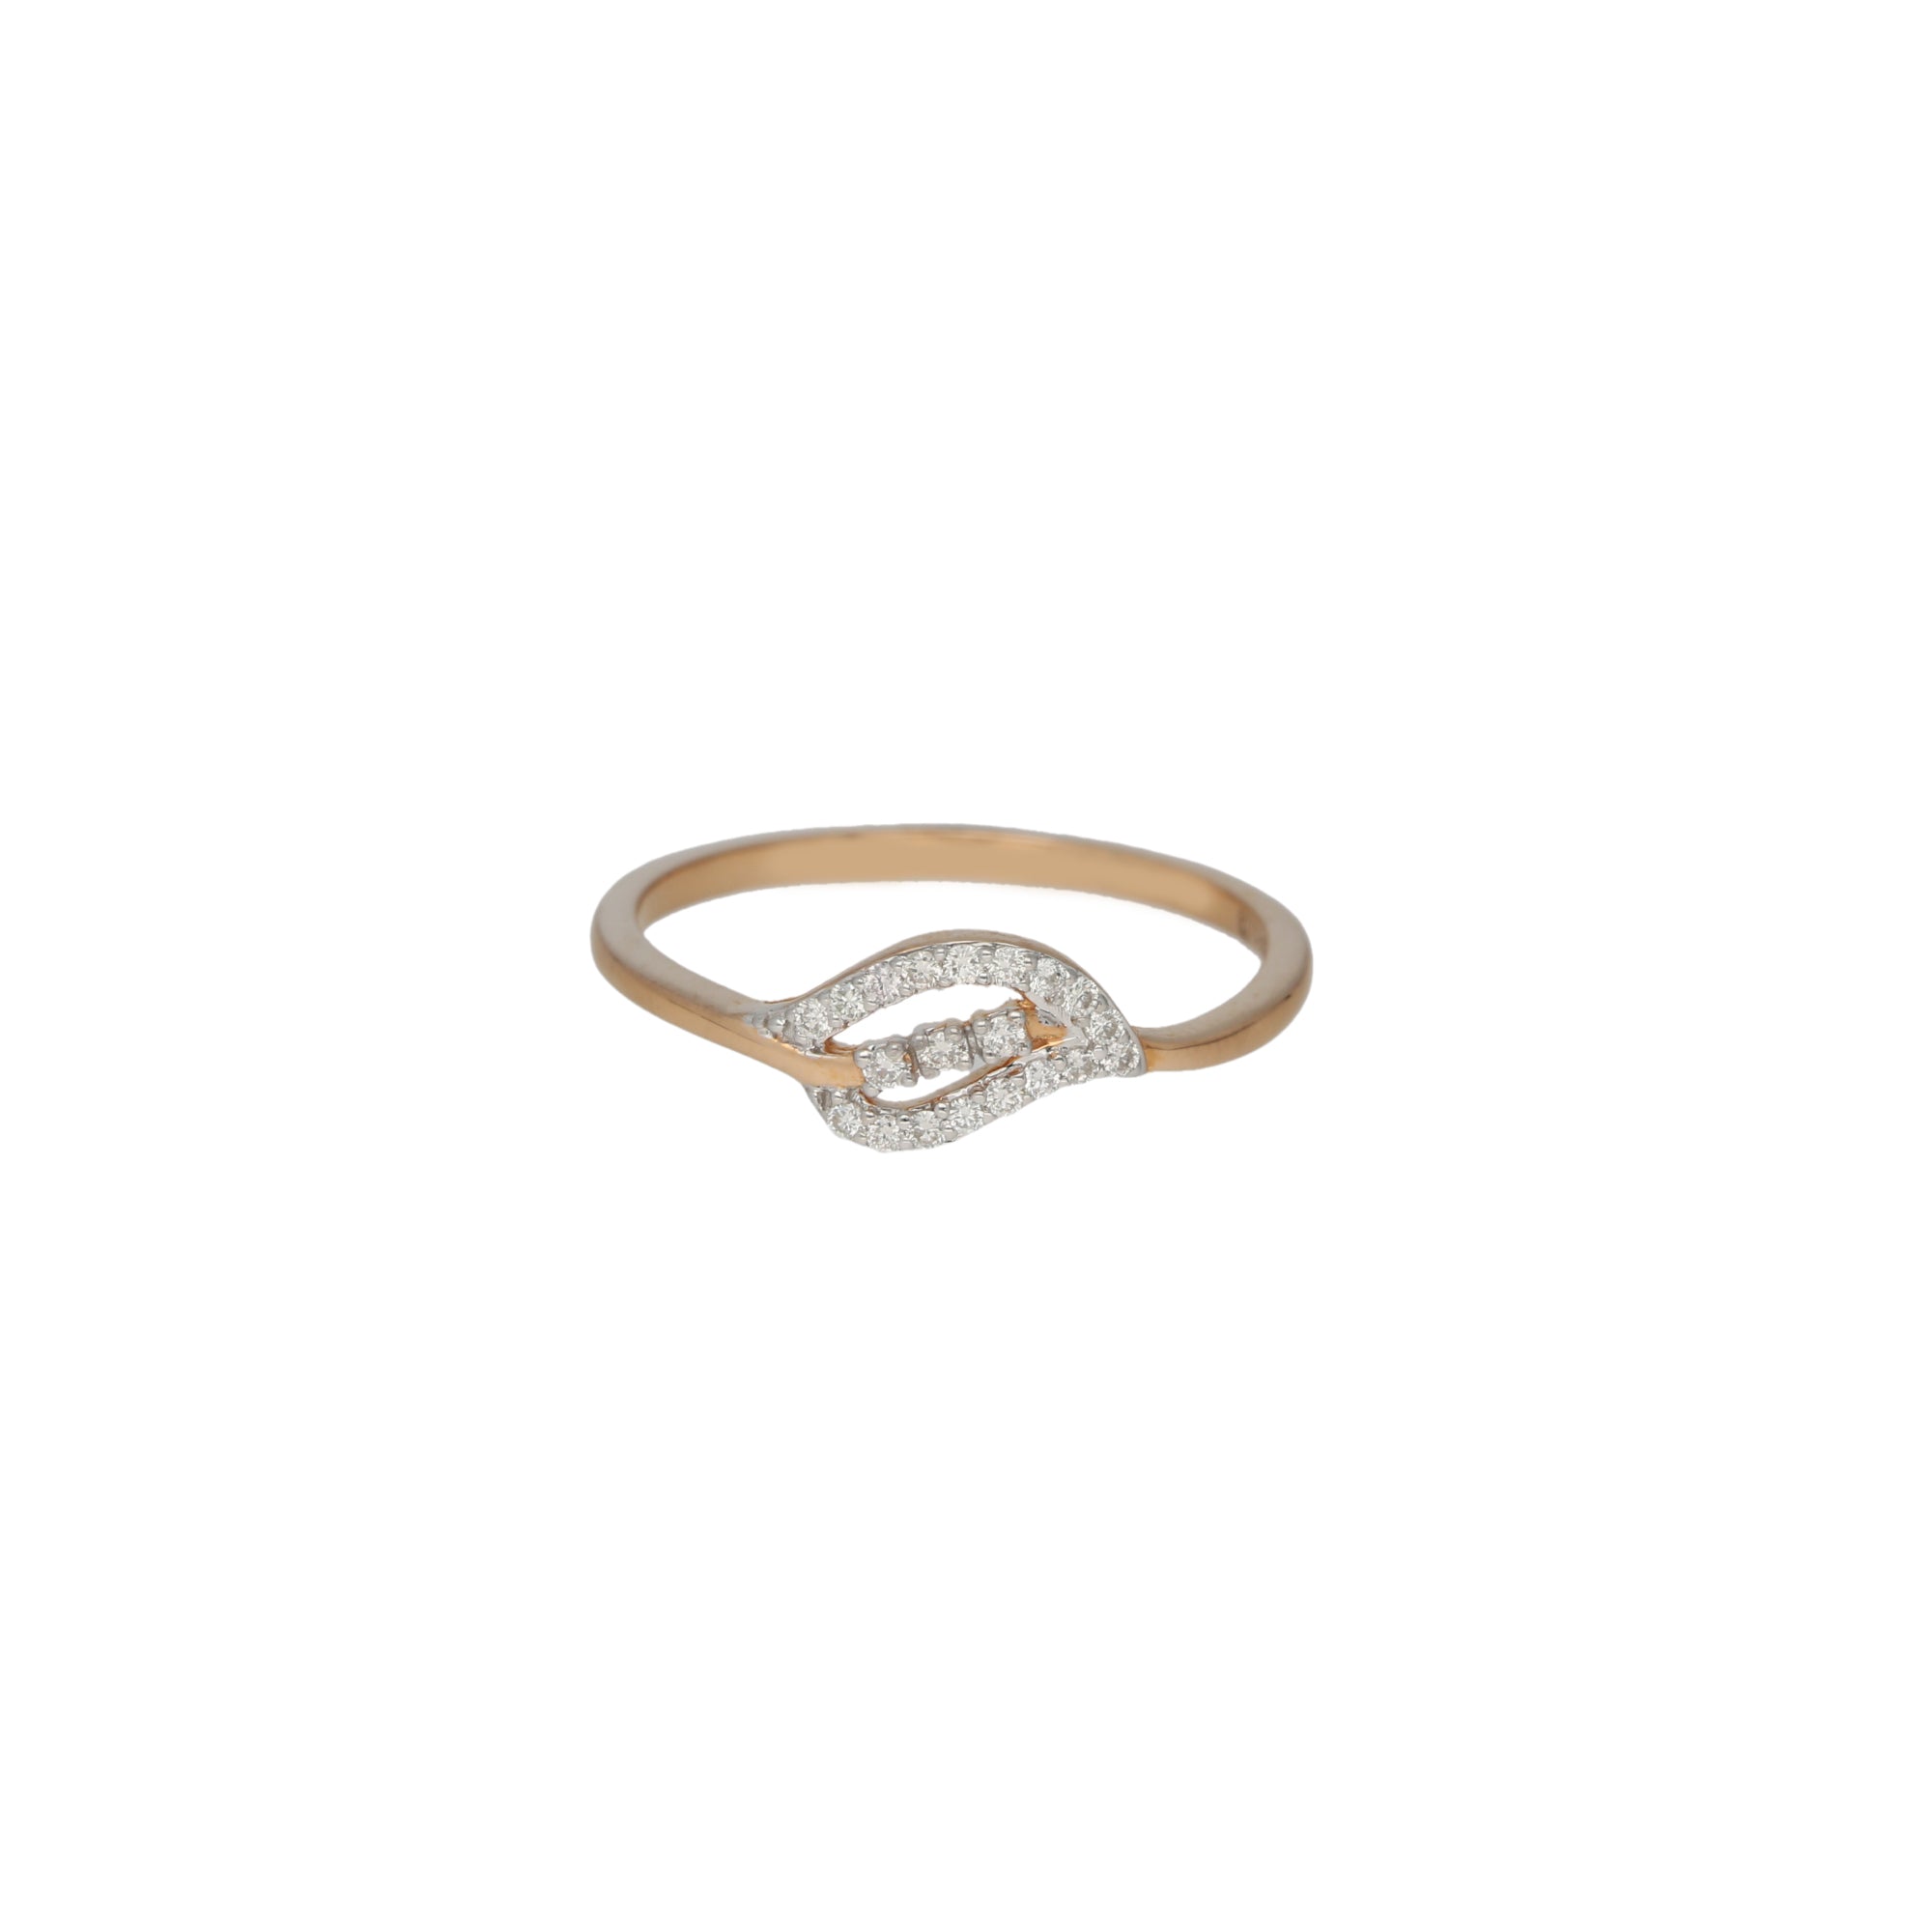 Engagement Rings | Tanishq Online Store